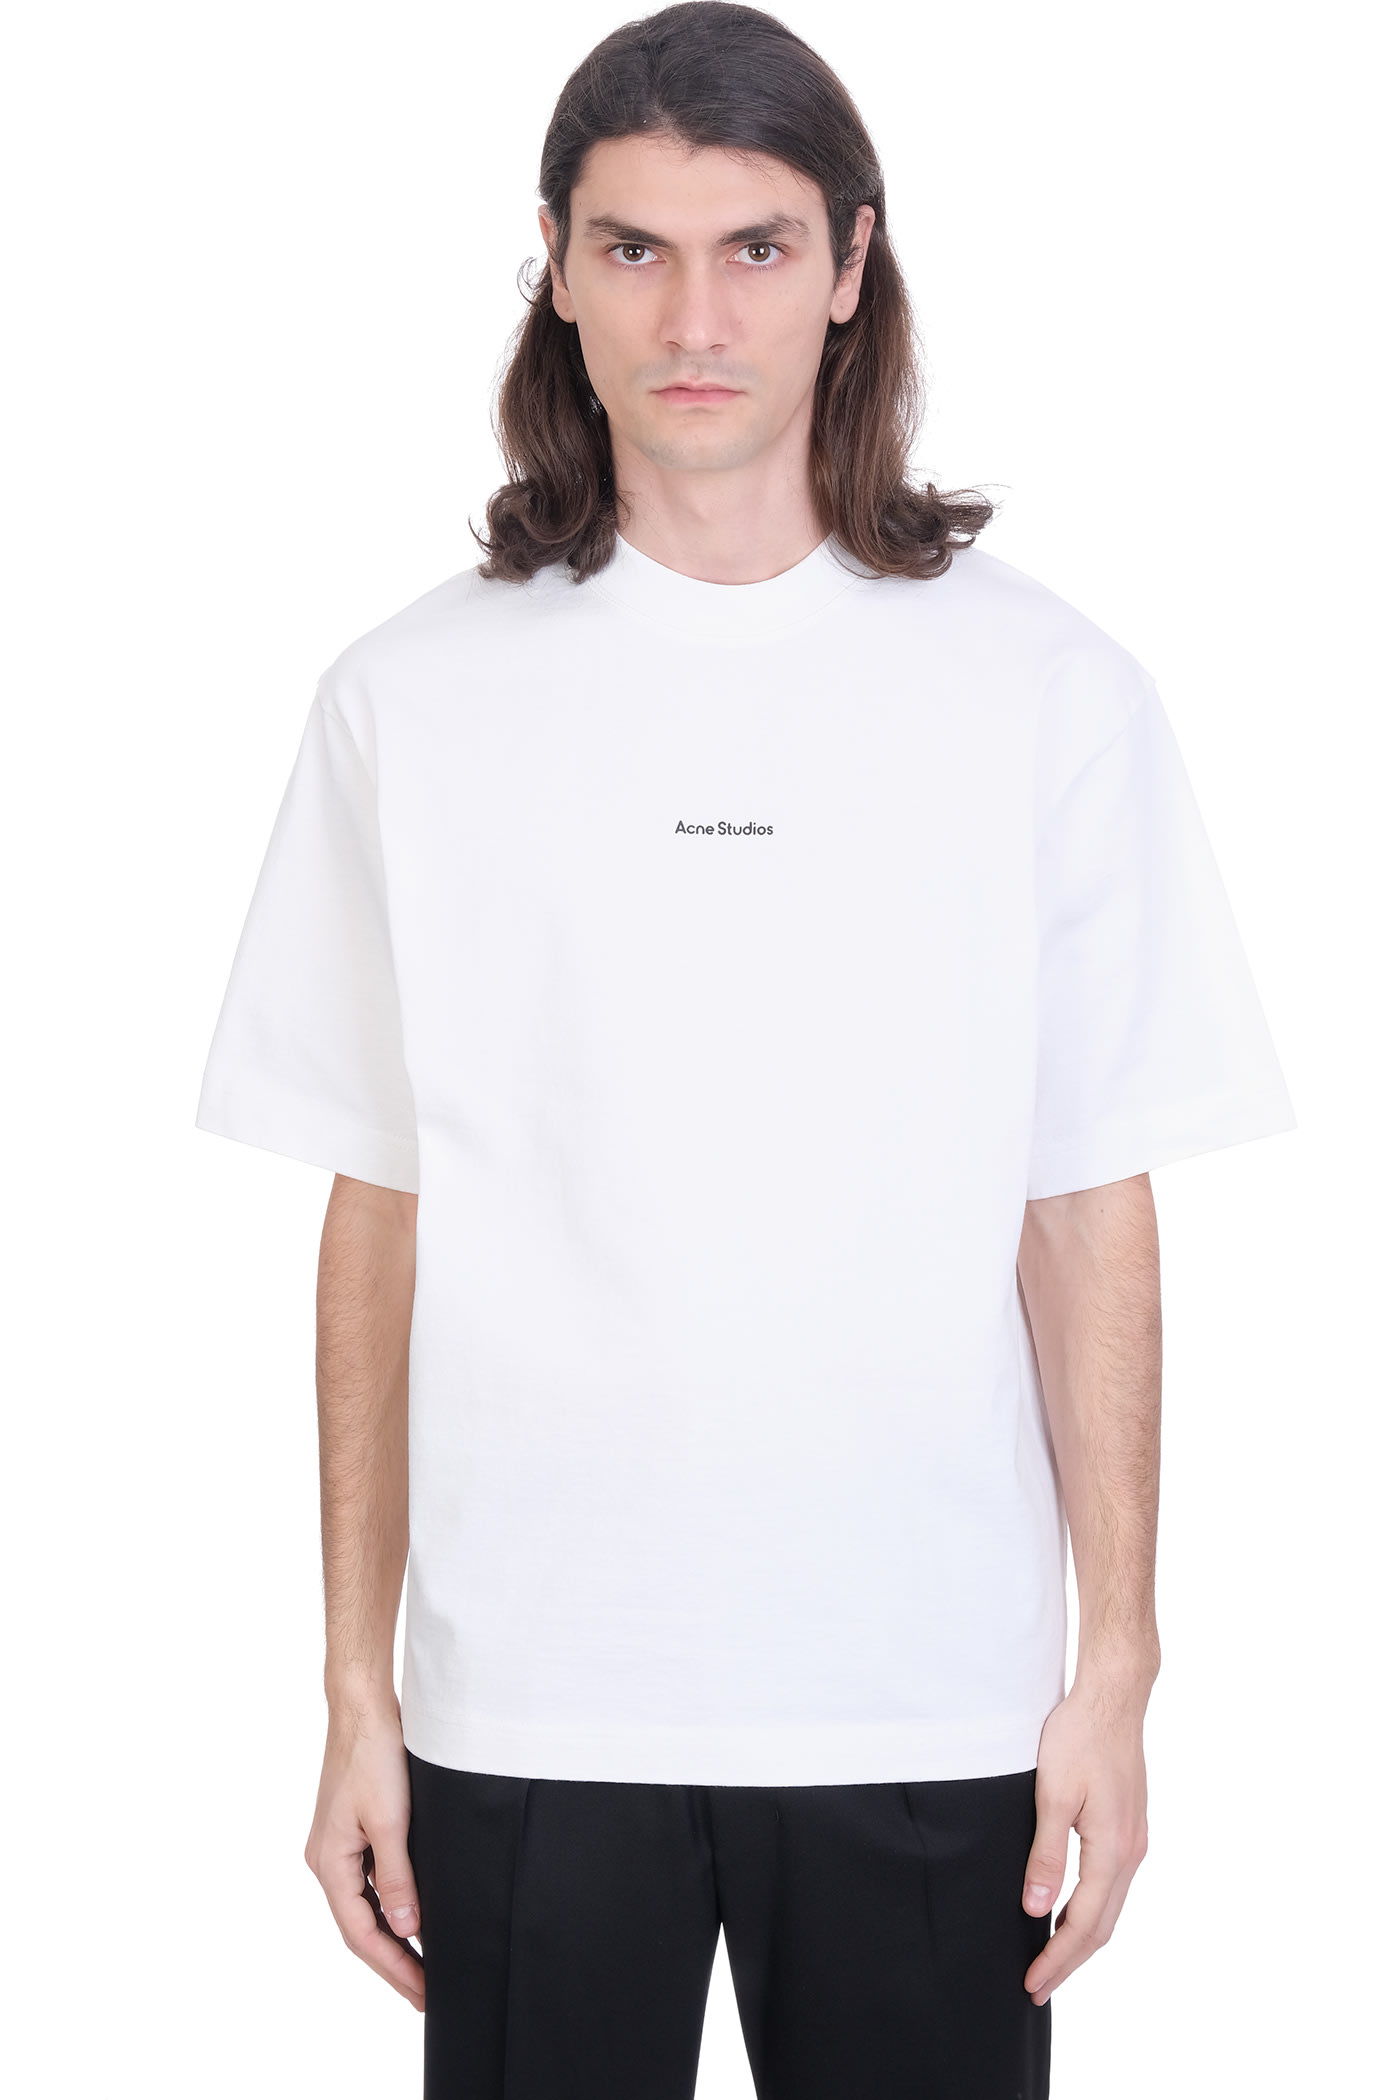 Acne Studios Extor Stamp T-shirt In White Cotton